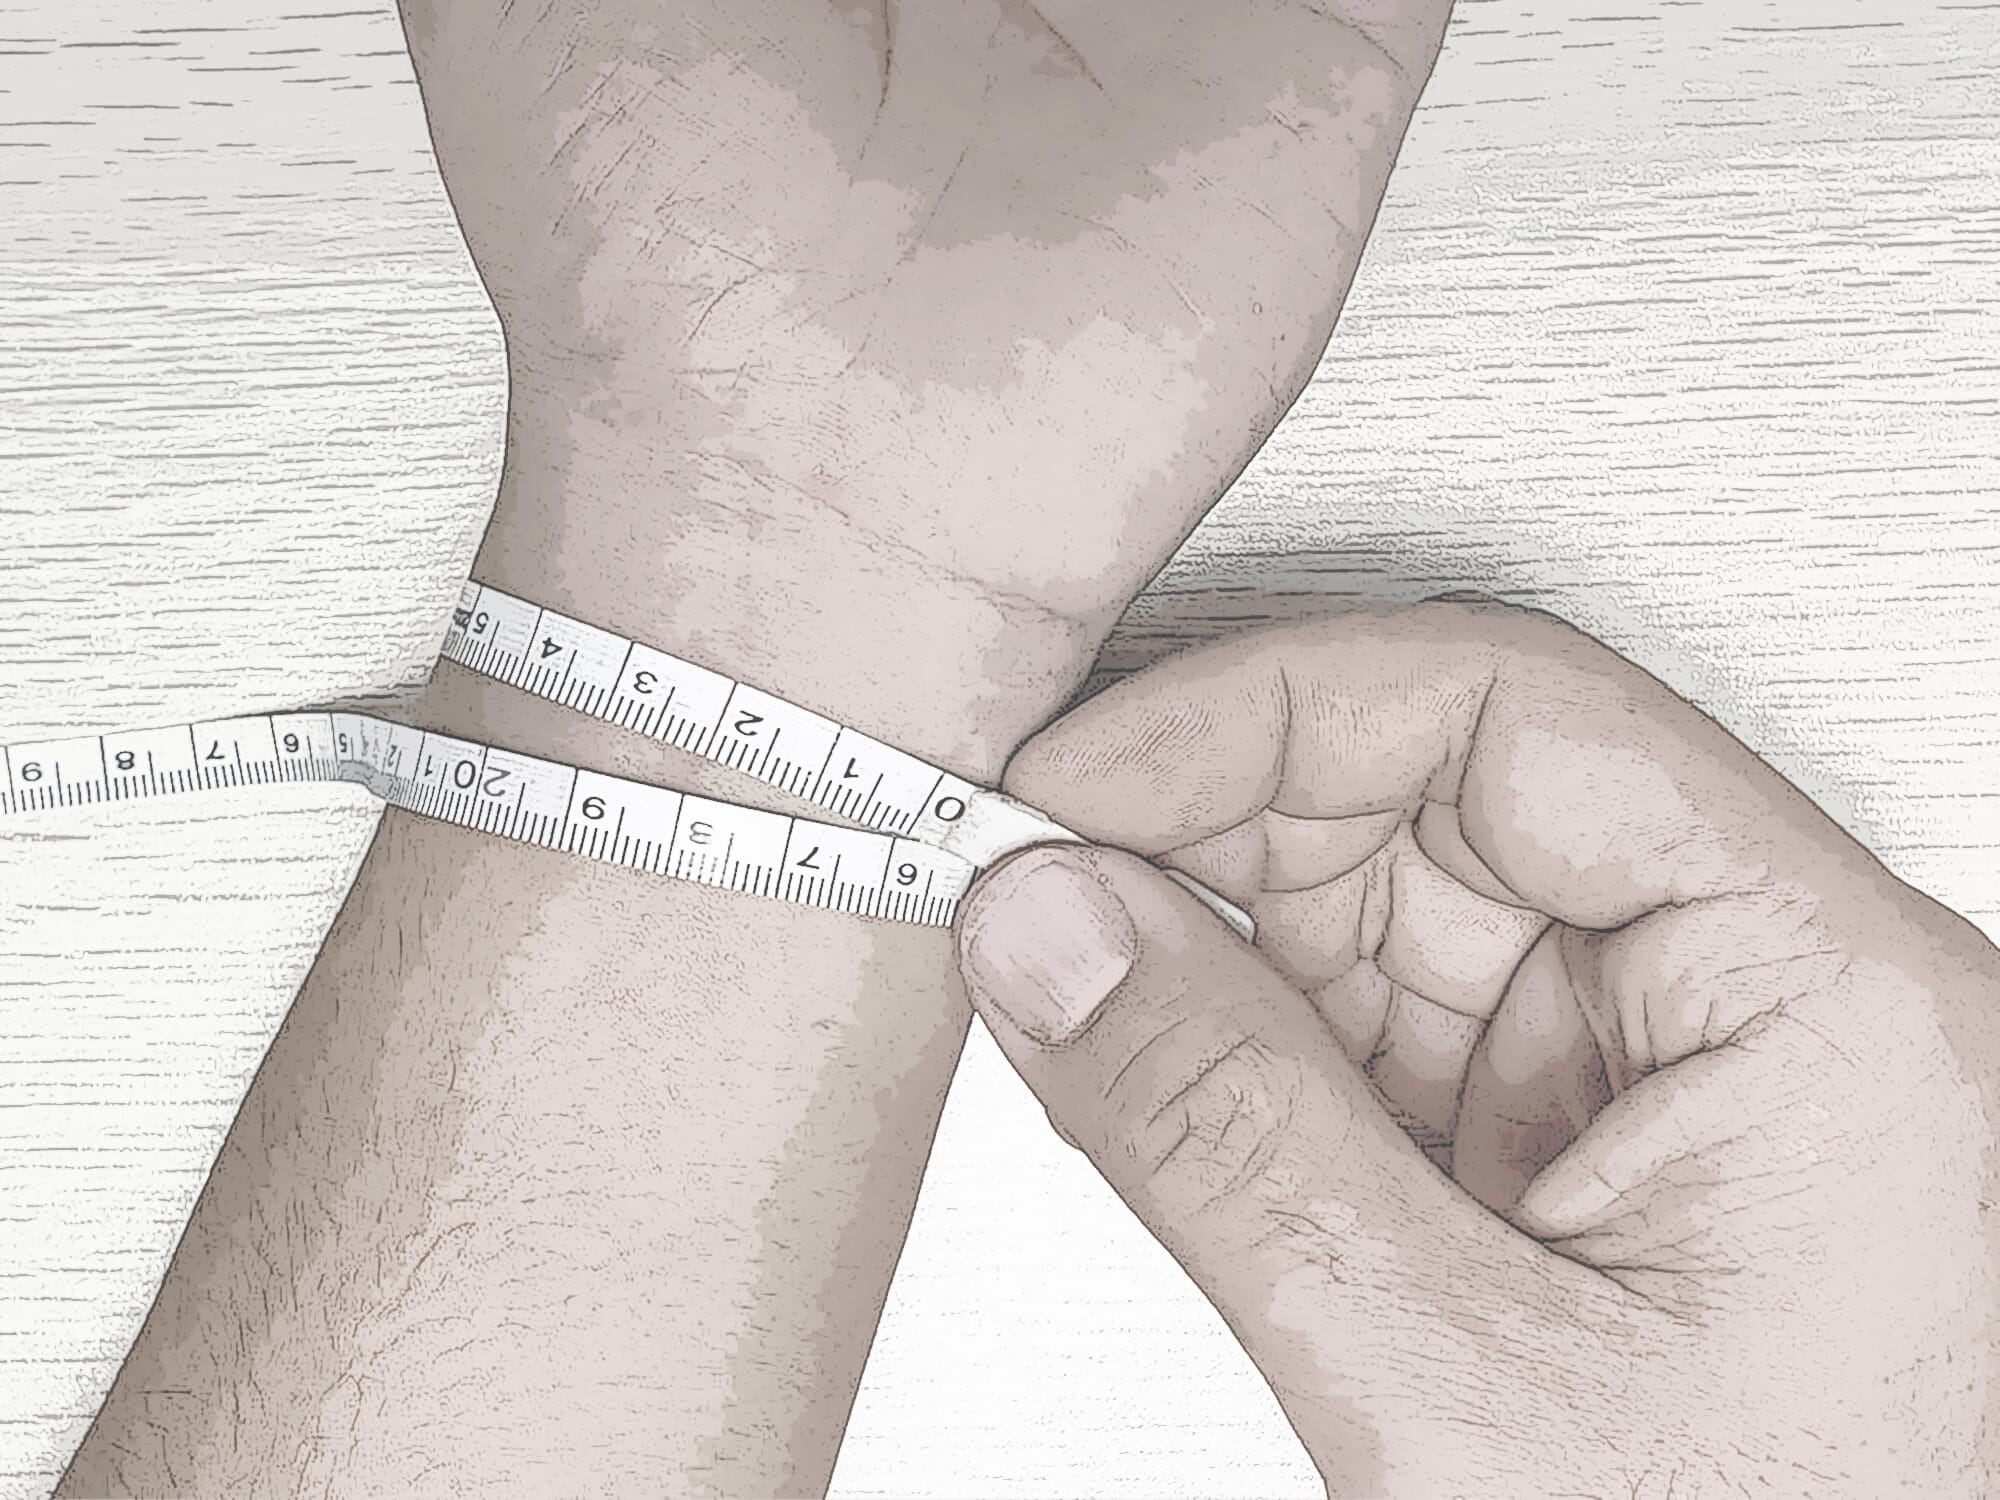 how to measure your wrist with tape step 2